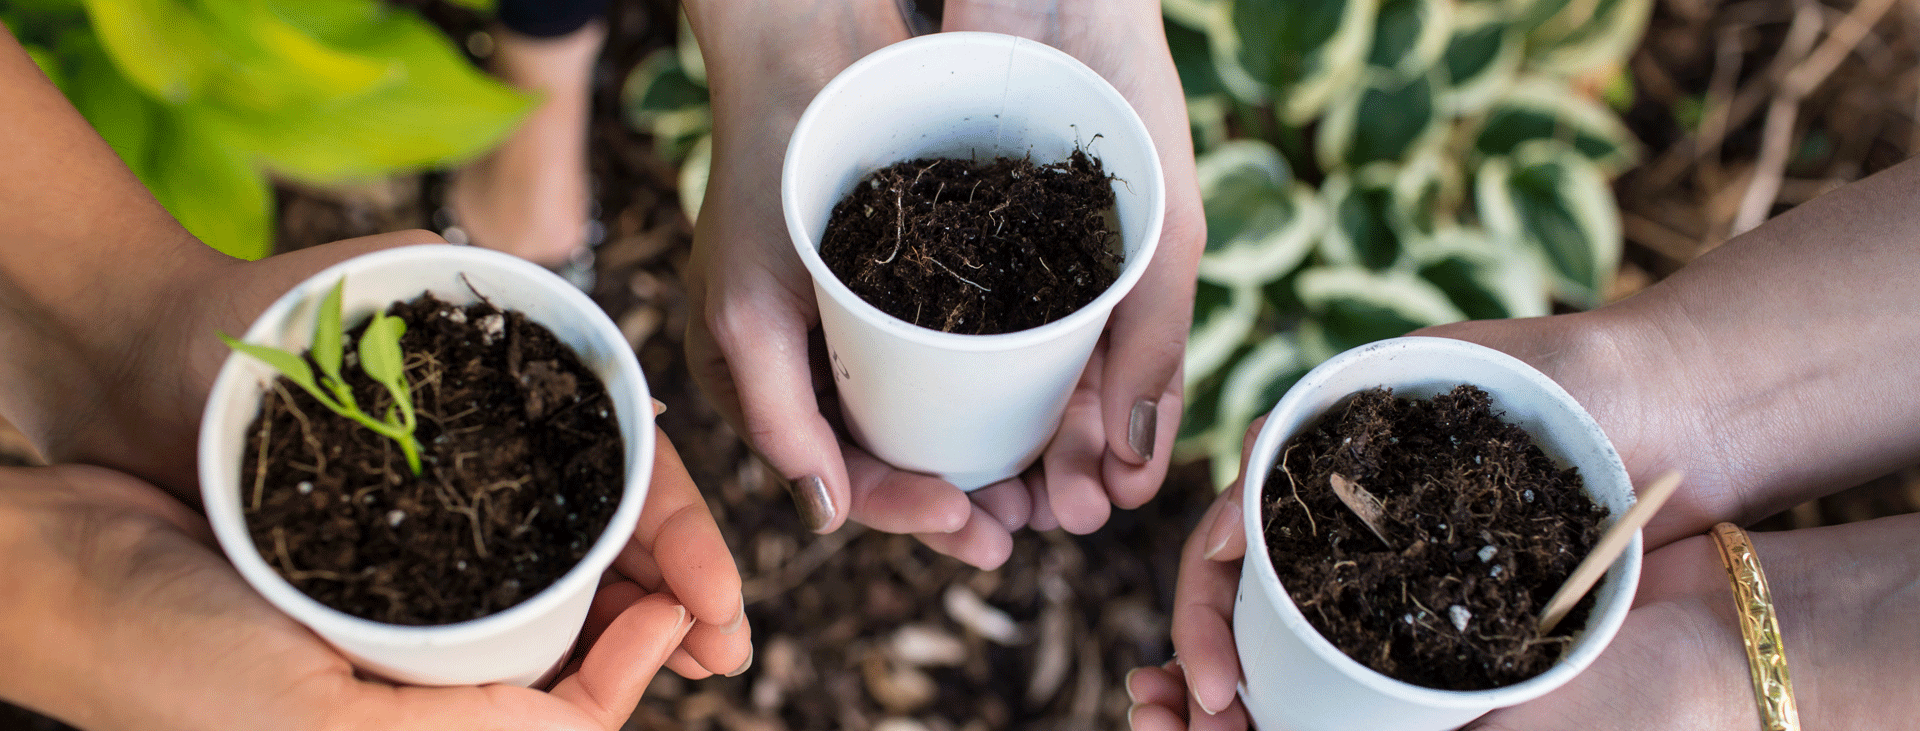 Three pairs of hands holding new plantings in styrofoam cups